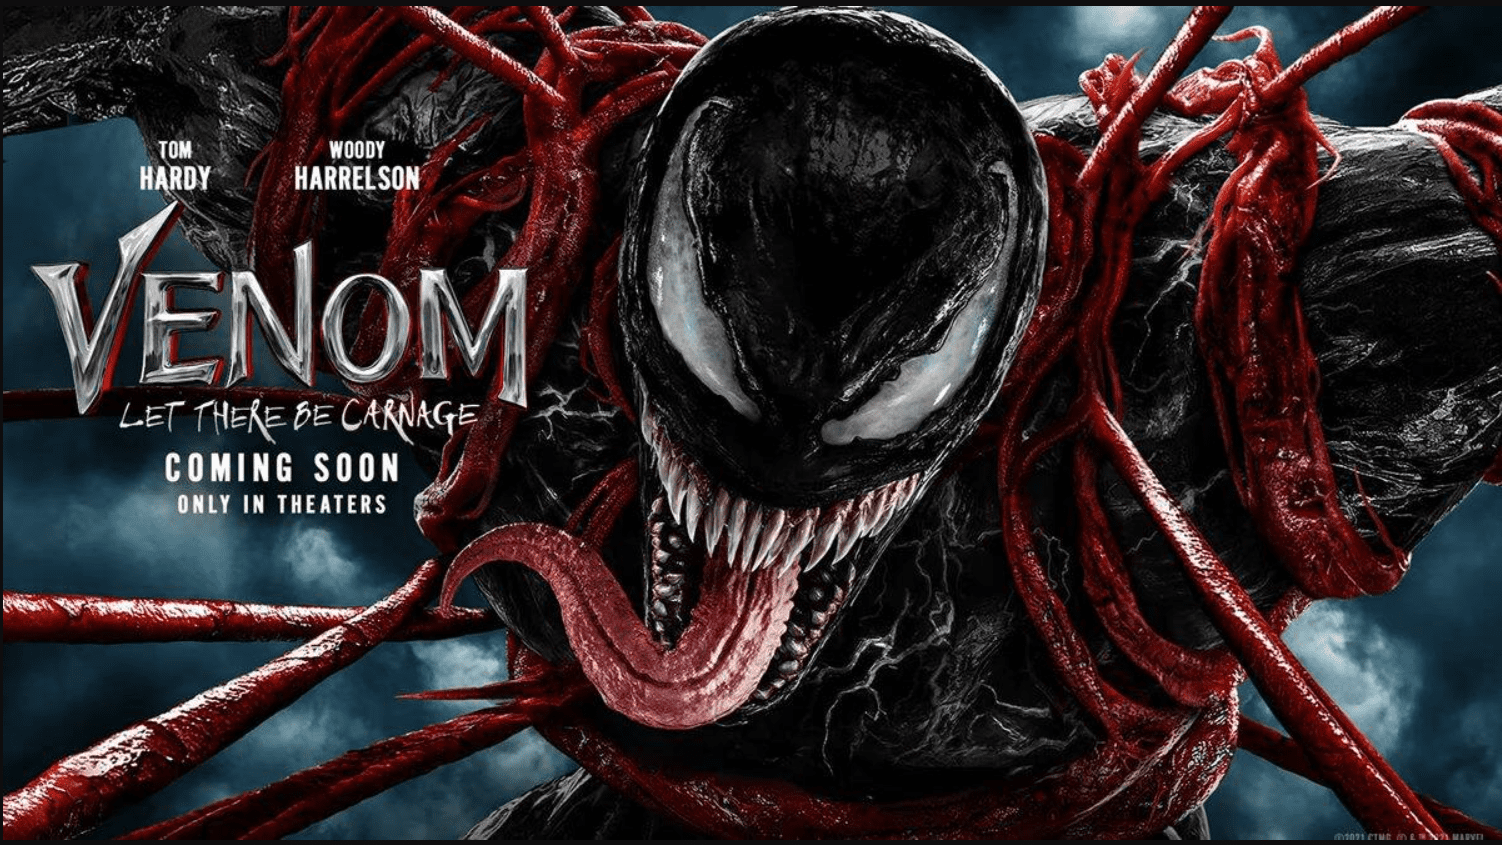 What Apps Is Venom Let There Be Carnage On Tráiler de Venom: Let There Be Carnage - GEEKplay